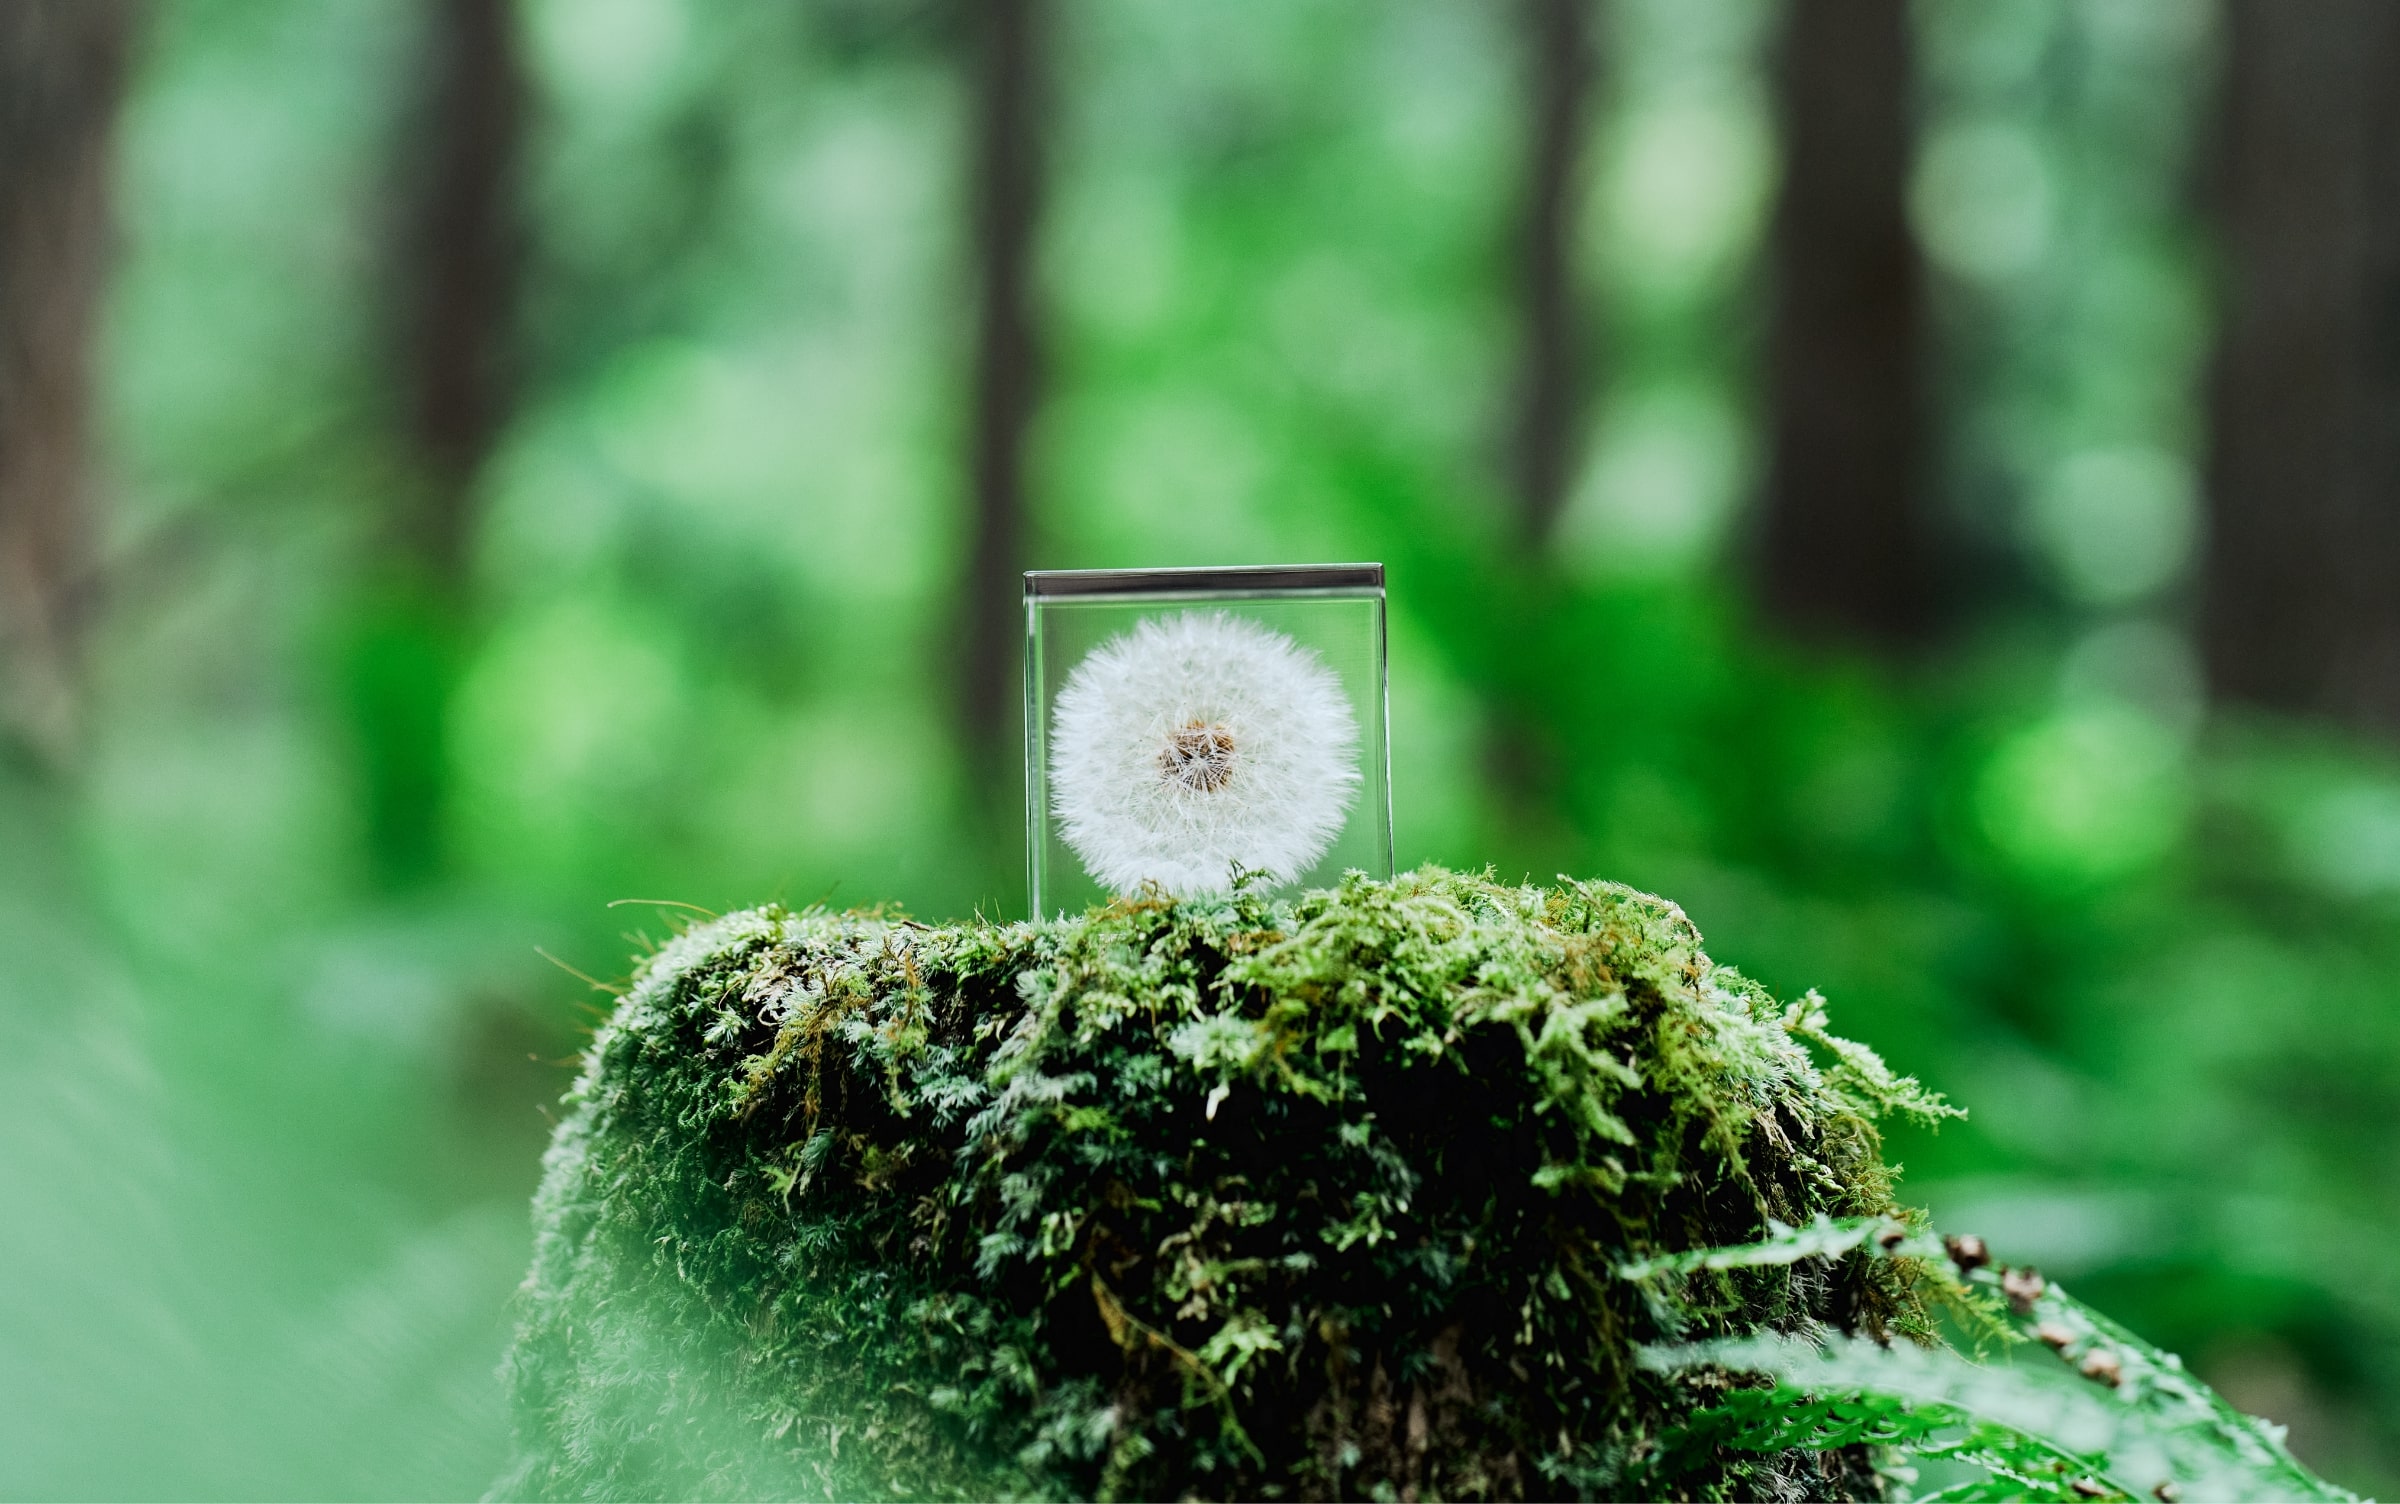 Sola cube is placed in a mossy forest